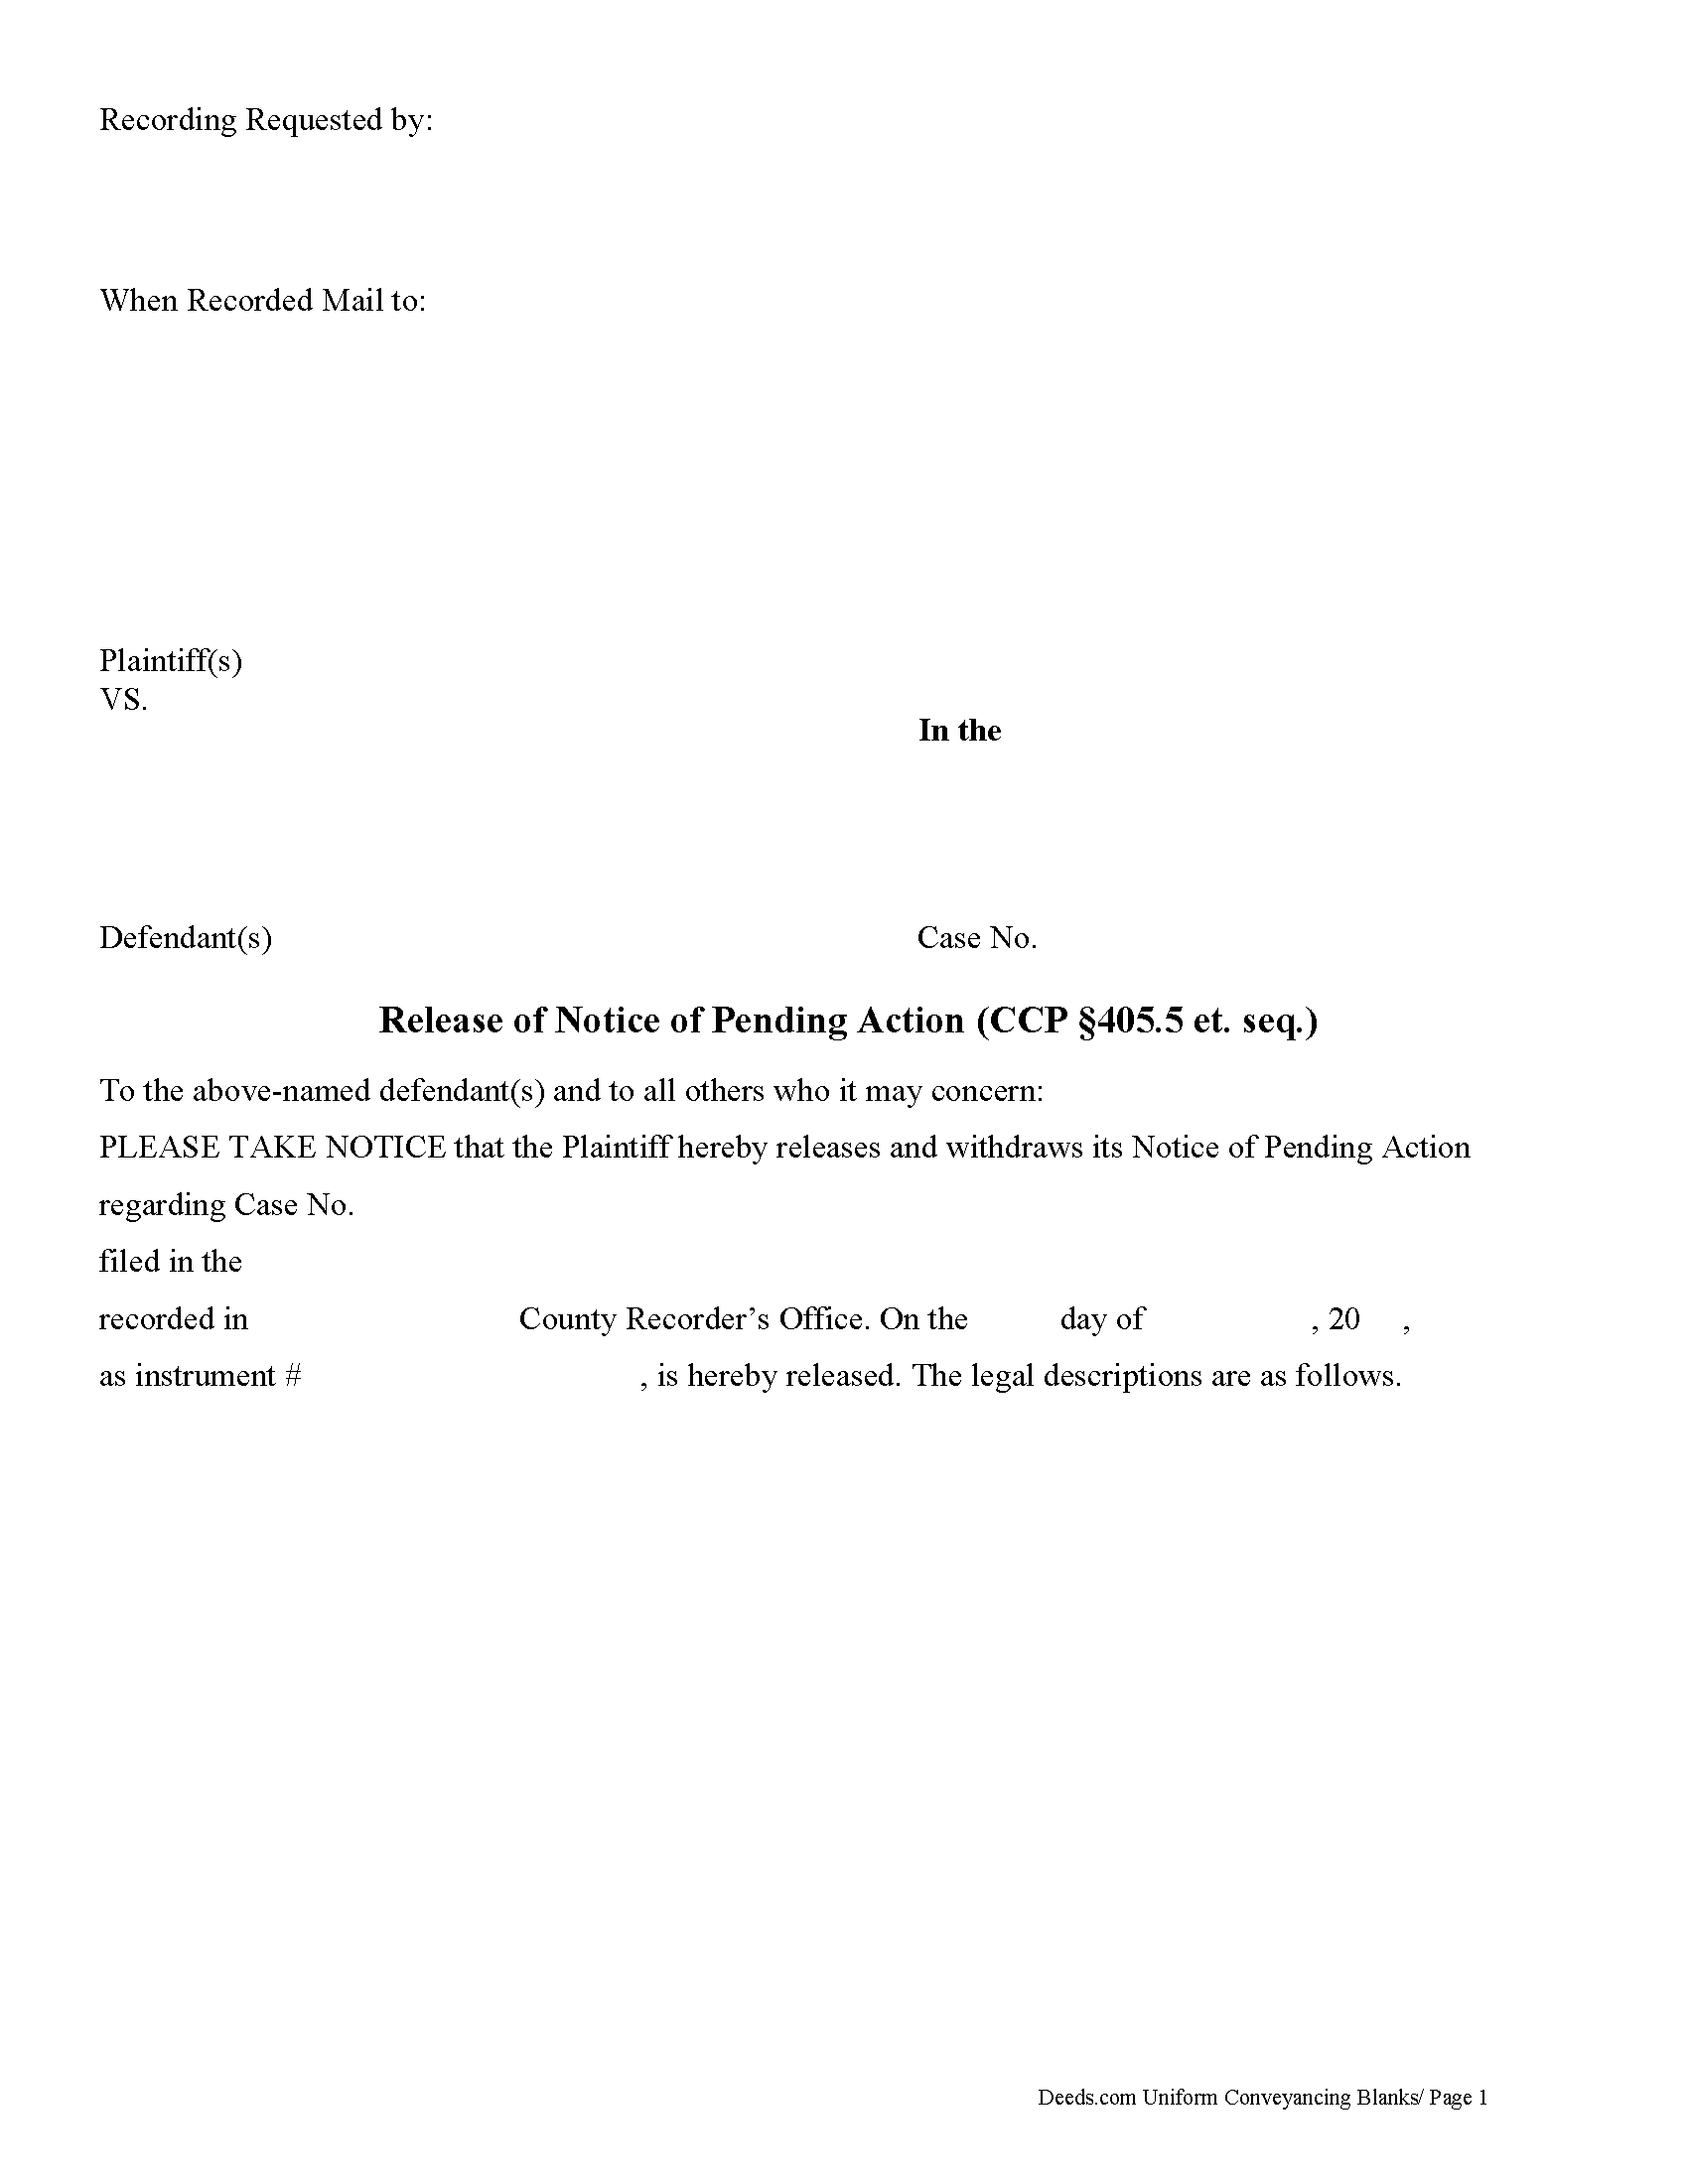 California Release of Notice of Pending Action Image